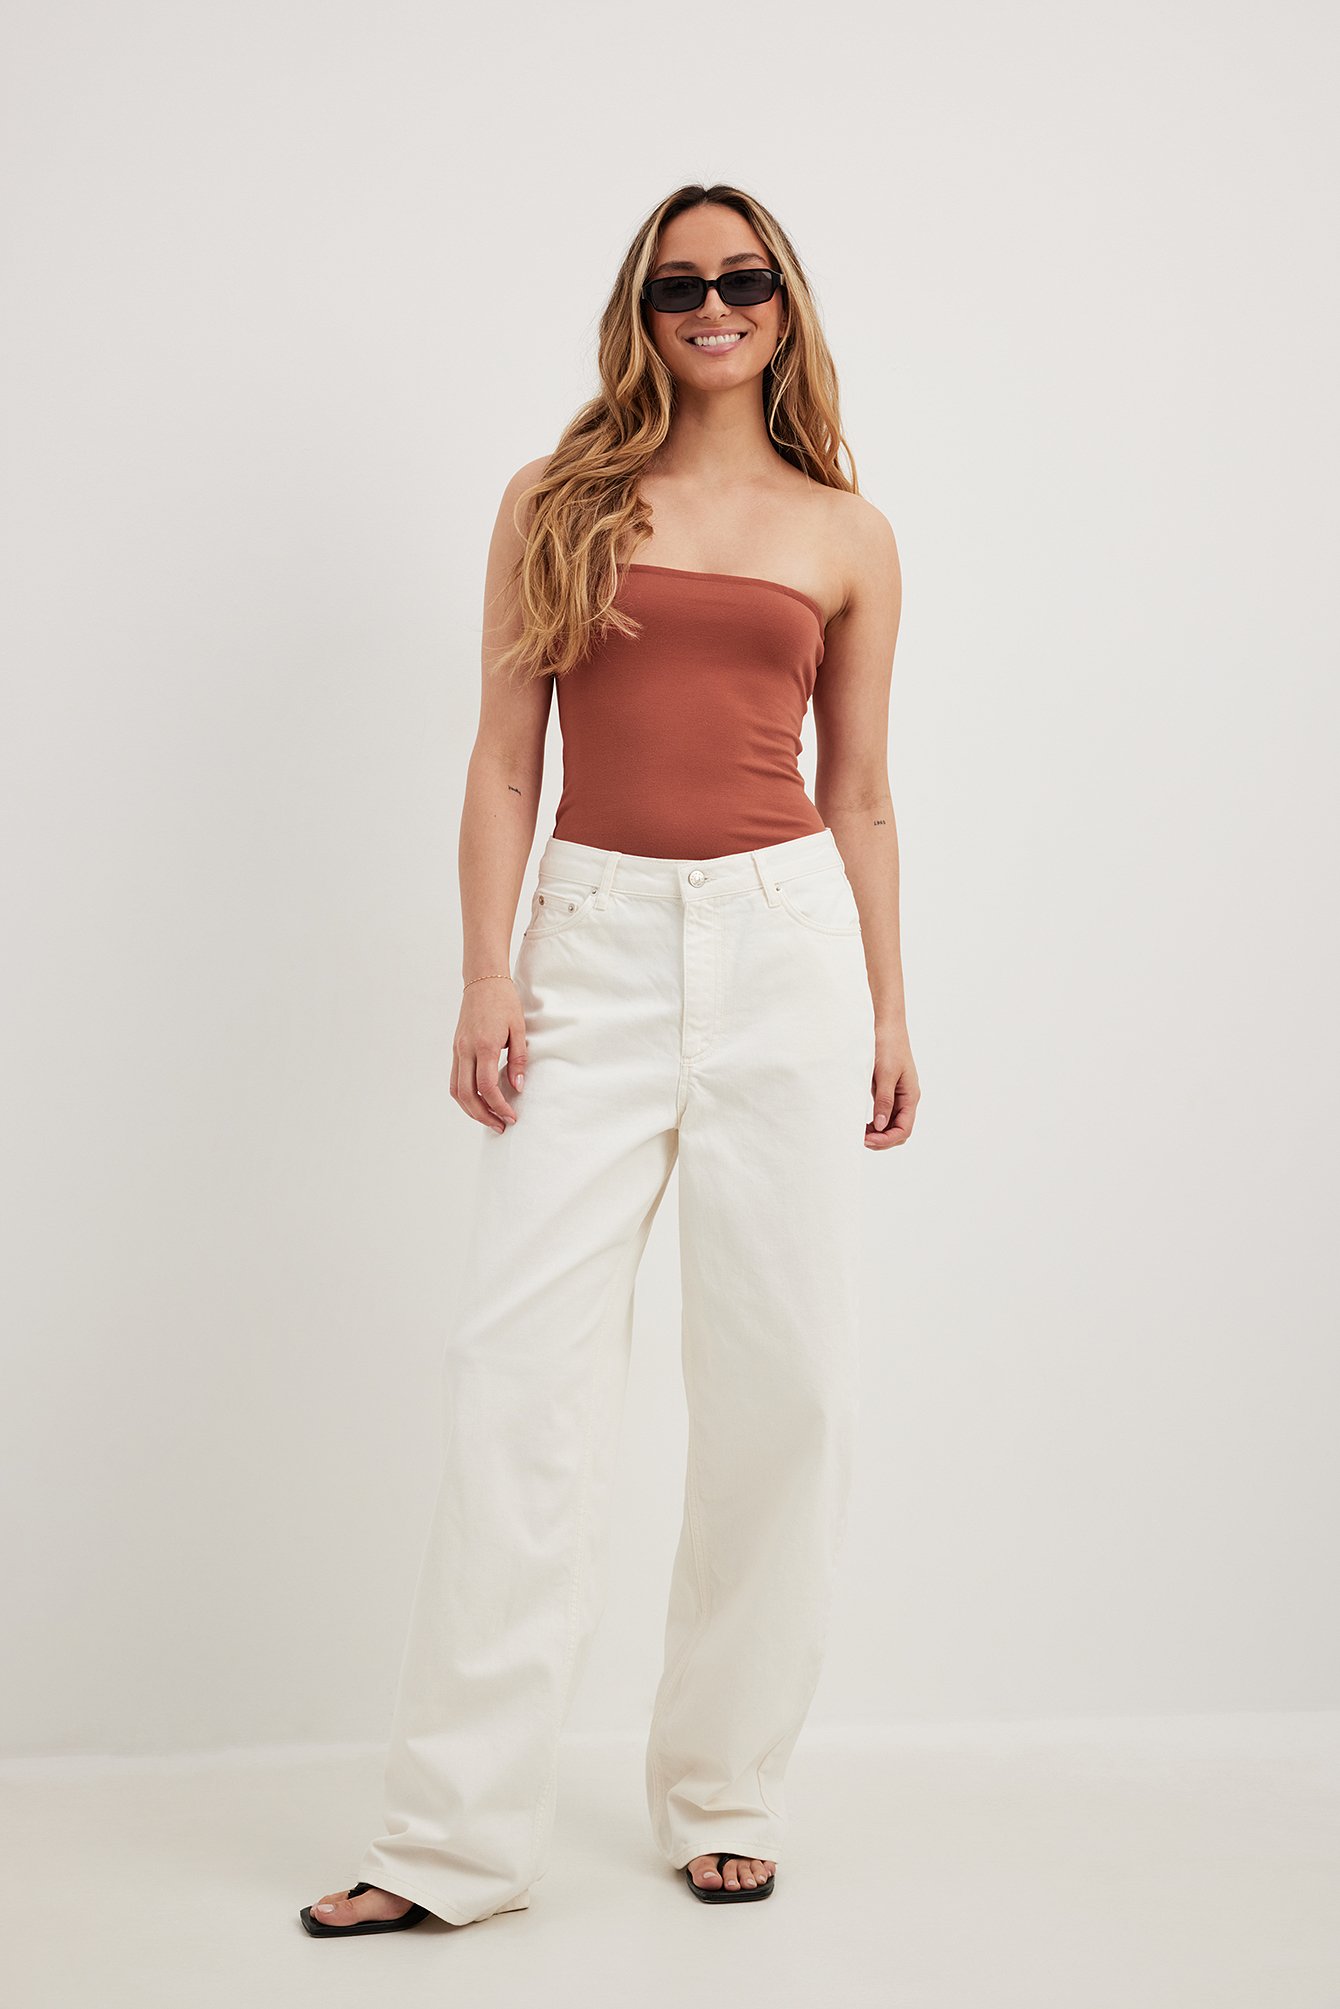 KMBANGI Women Baggy Cargo Pants Y2K High Waisted Wide Leg Loose Casual  Pants Trousers Streetwear White Small  Amazonca Clothing Shoes   Accessories